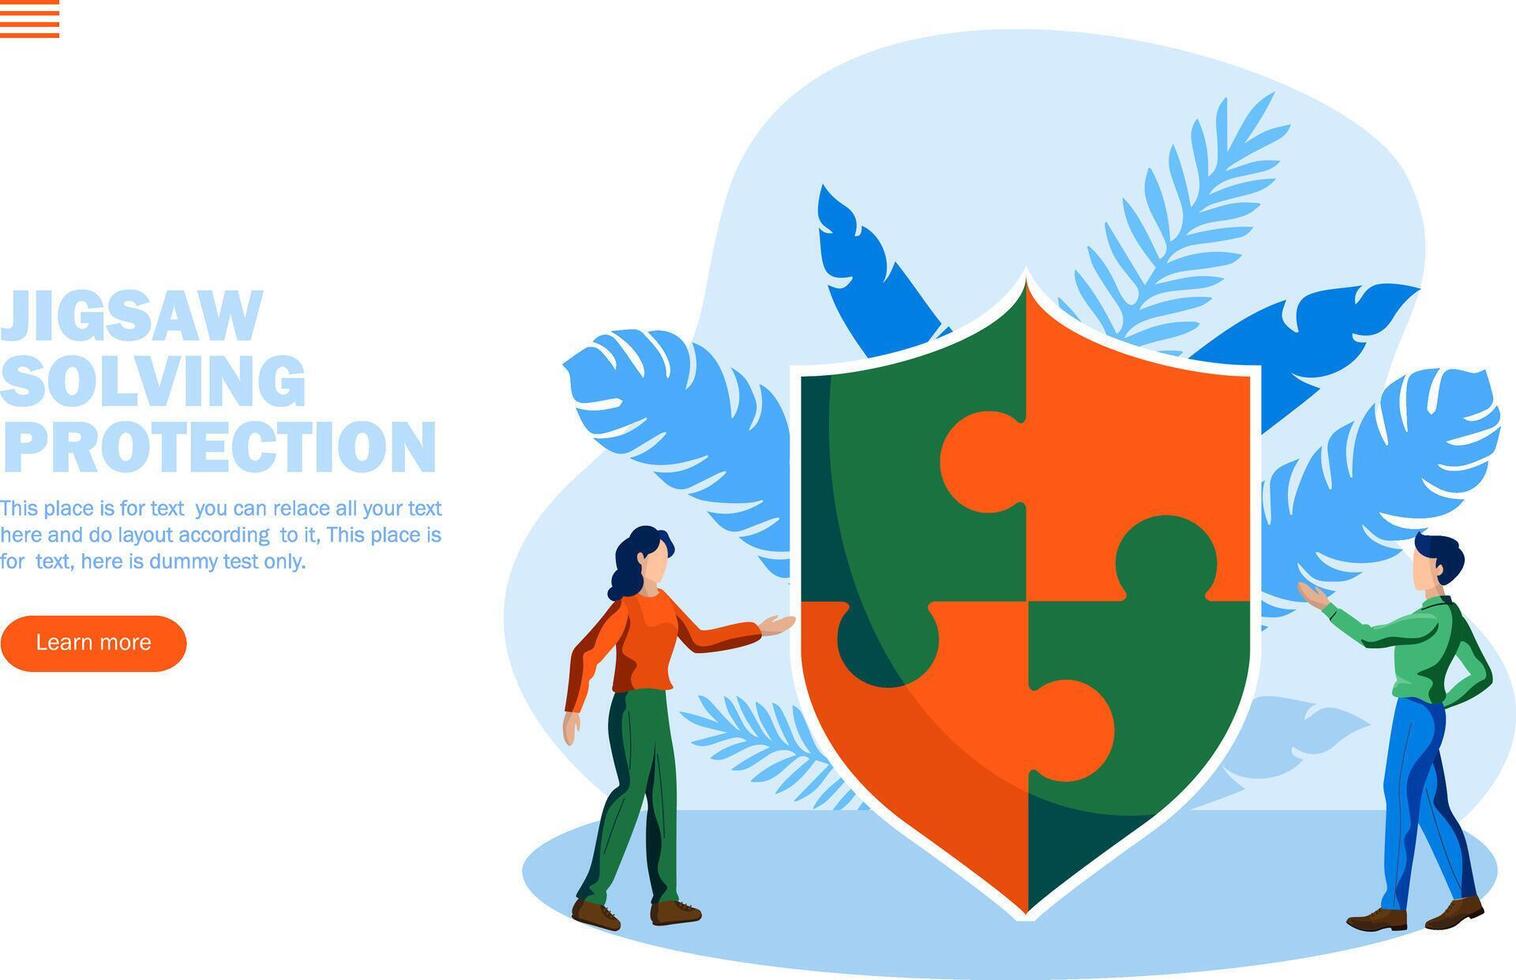 problem solving with jigsaw shield and two person conversation concept vector illustration